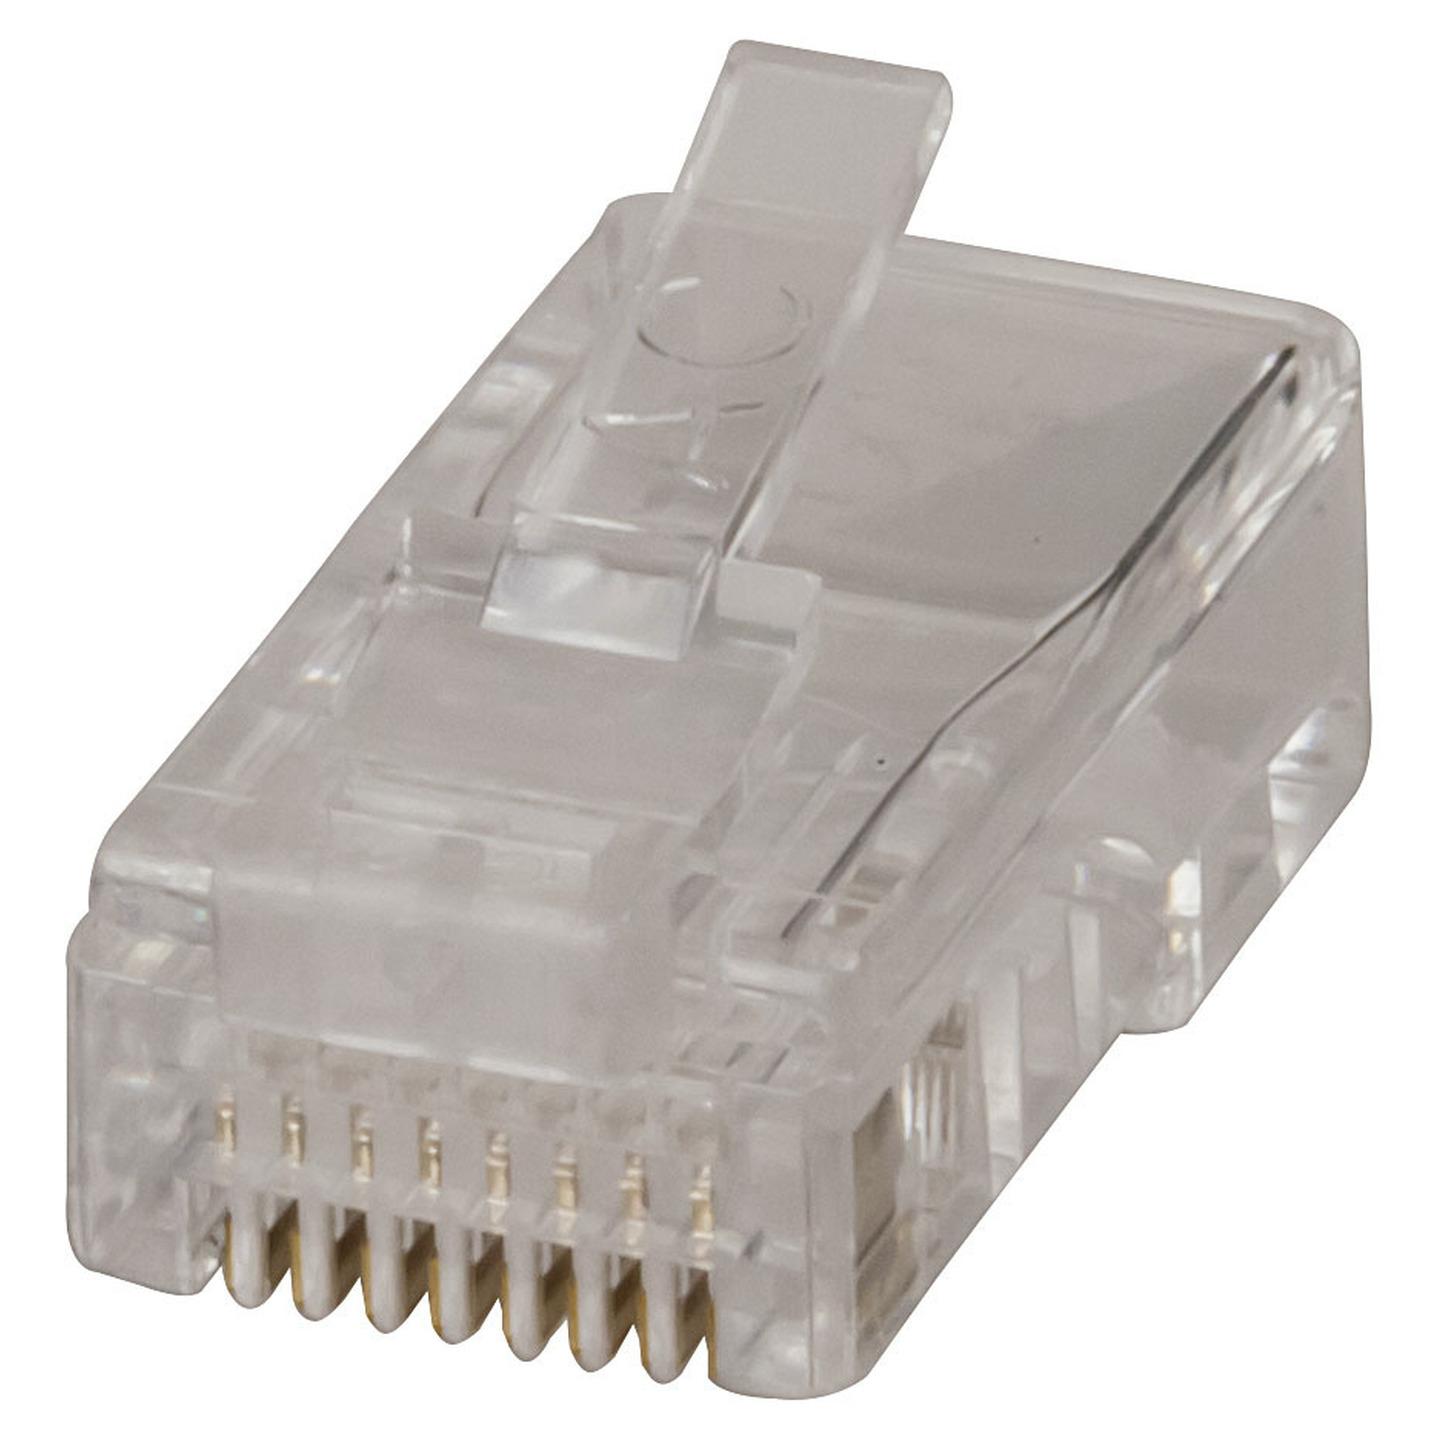 RJ45 8P/8C For Stranded Cable - Pack of 10